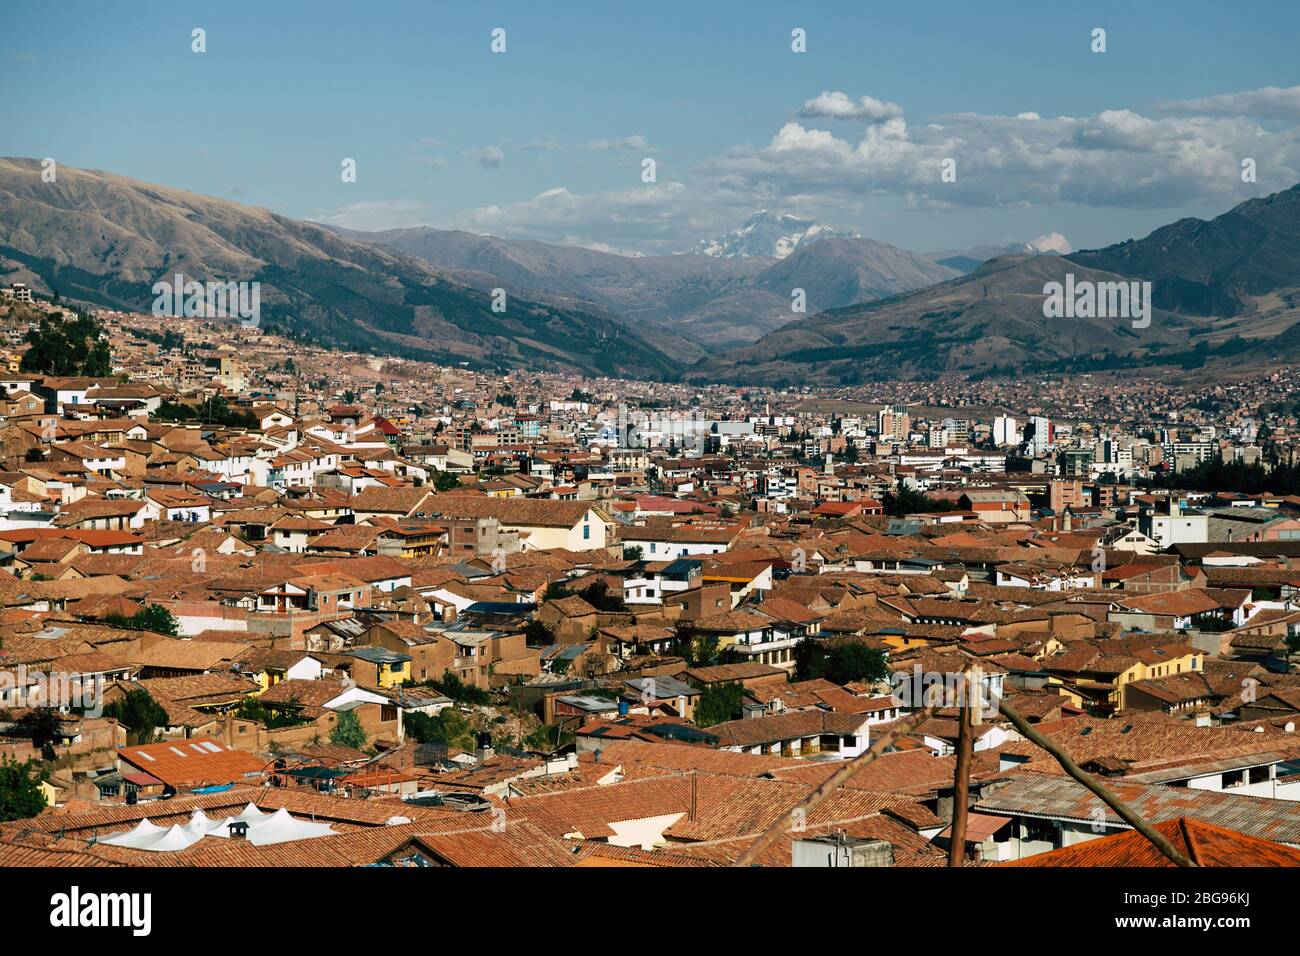 Areal view of Cusco, the beautiful Peruvian town near the Urubamba Valley of the Andes mountain range Stock Photo